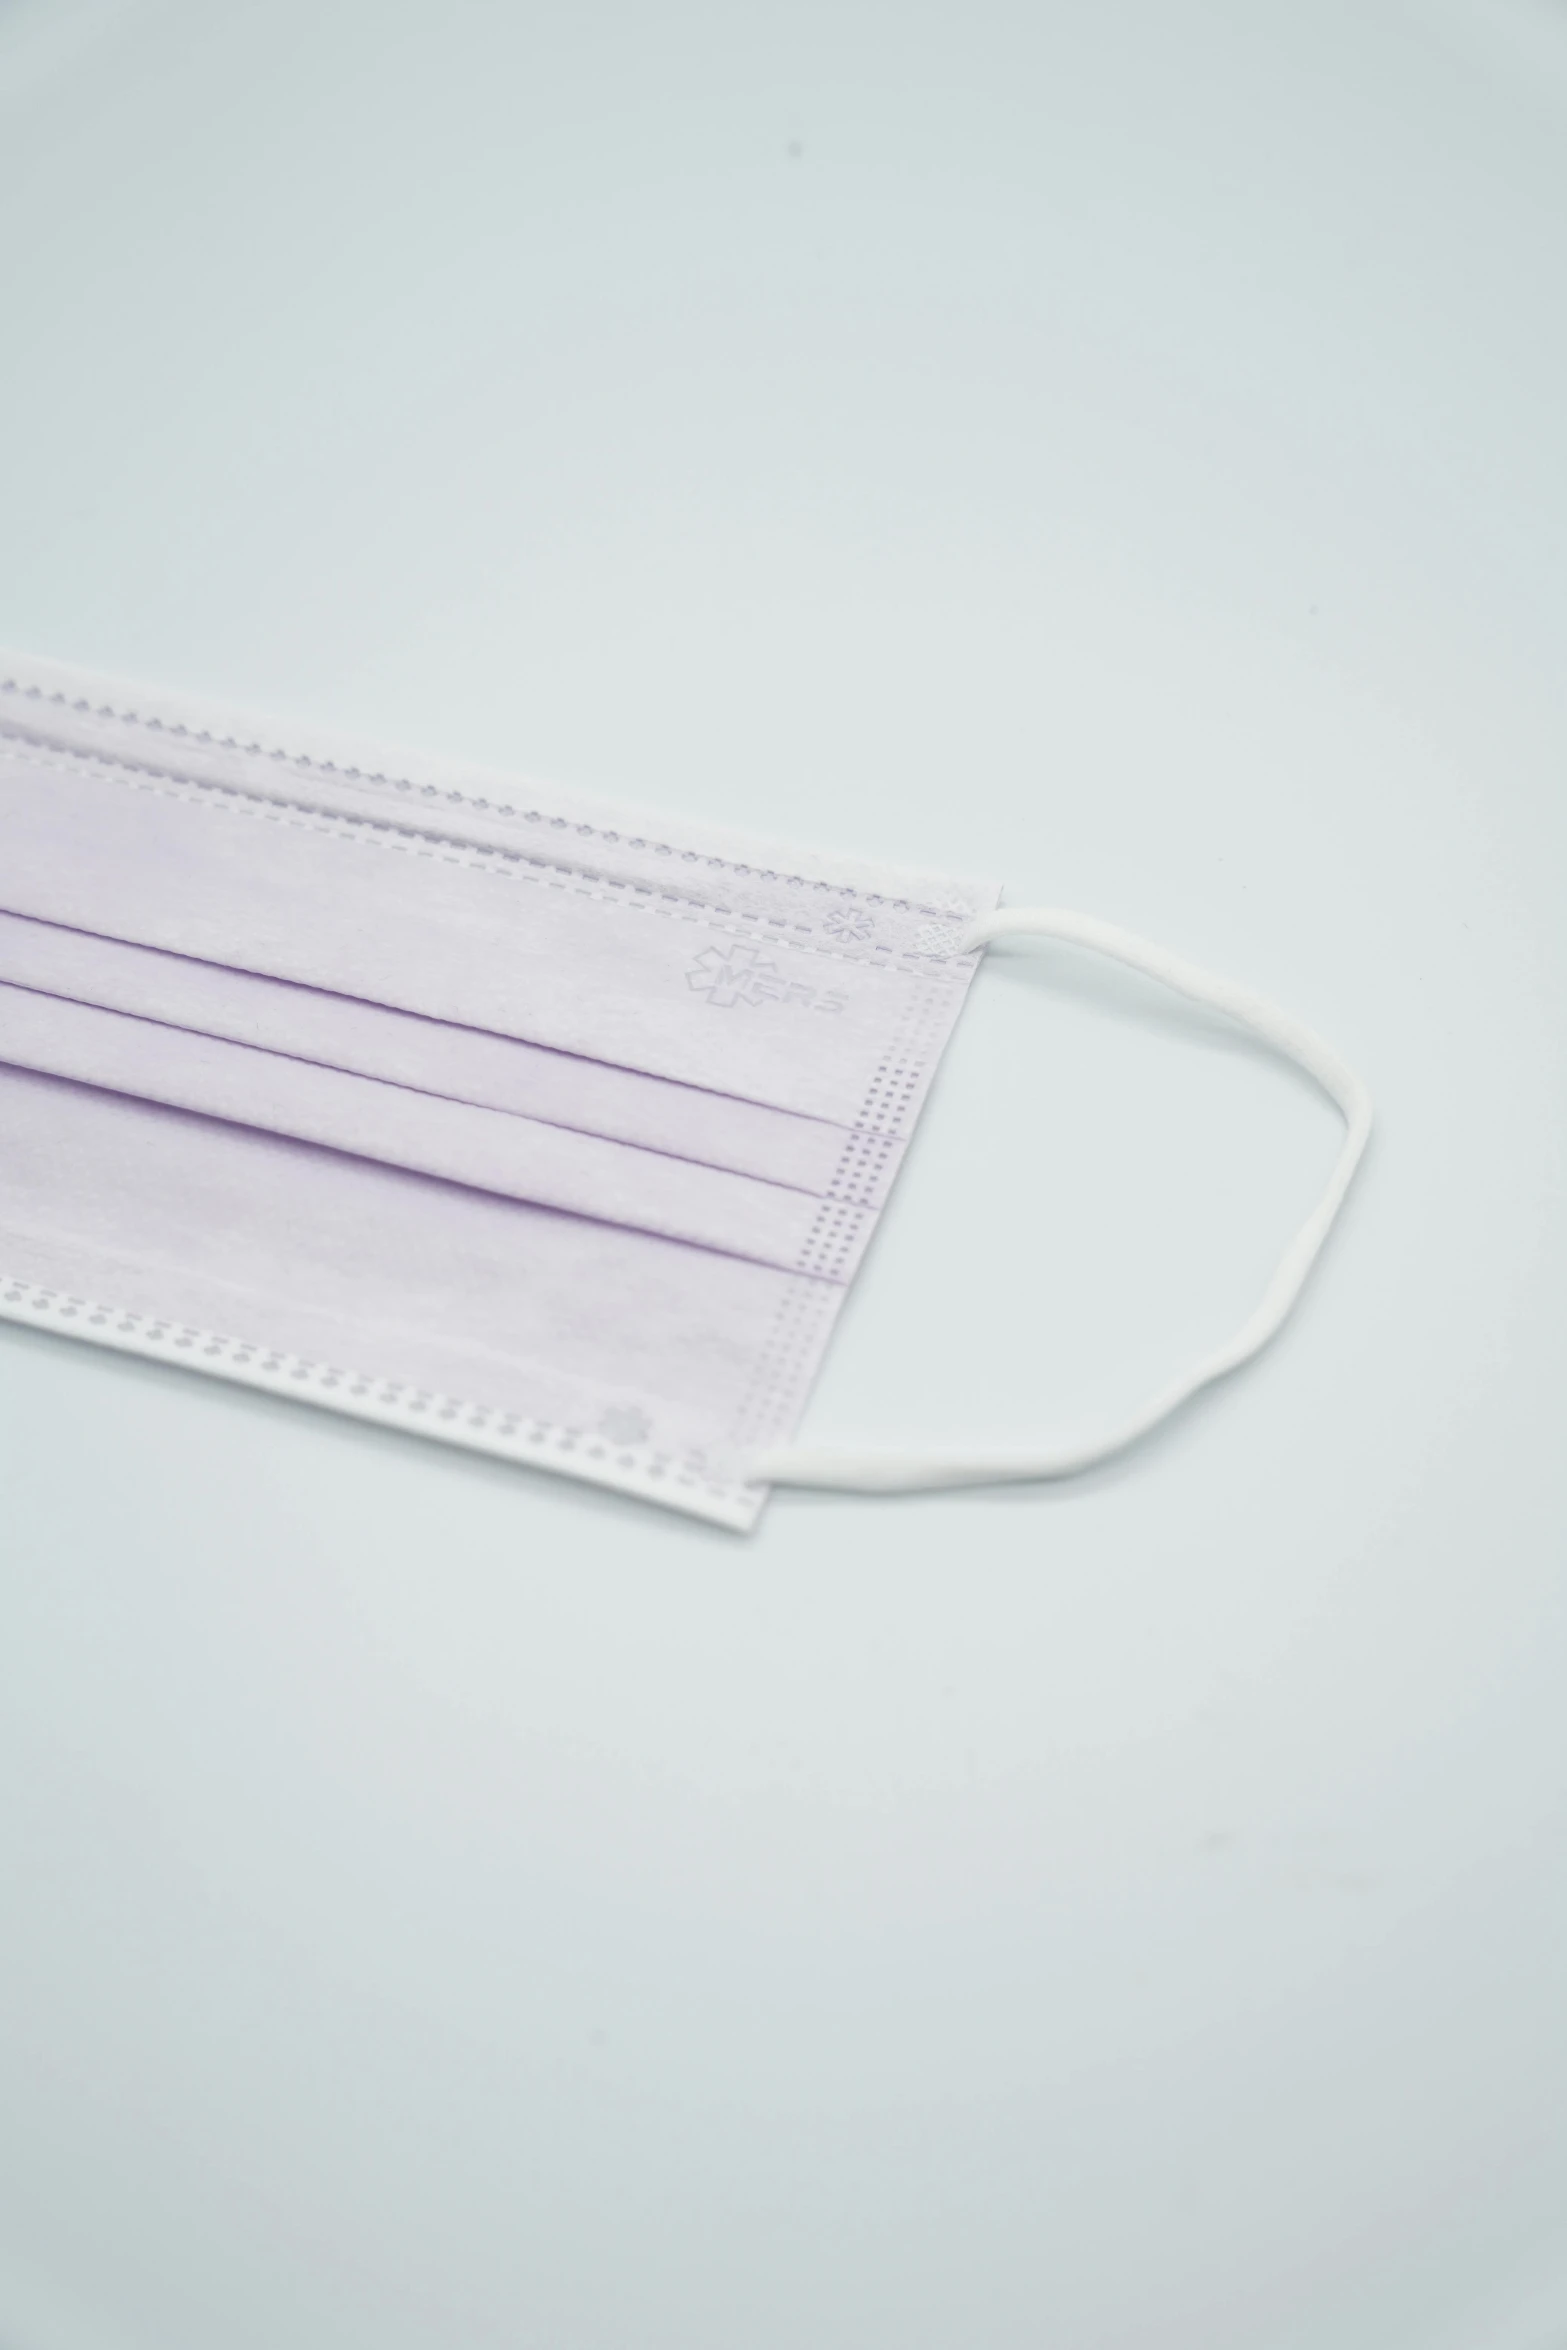 a purple face mask sitting on top of a white table, medical supplies, high detail product photo, rectangular face, 1 0 / 1 0